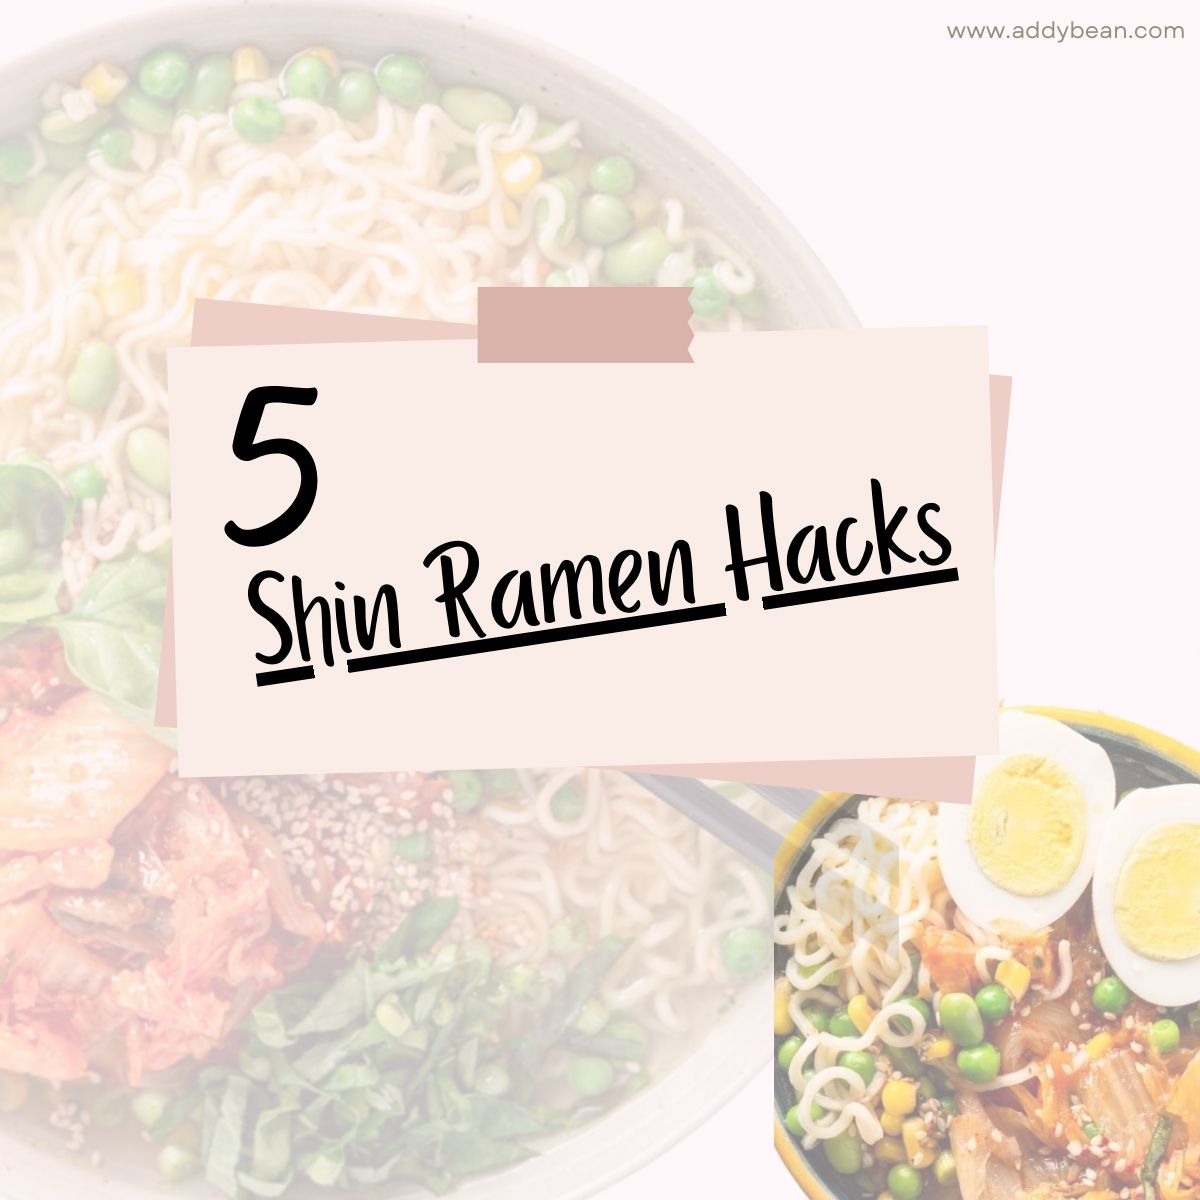 5 Shin Ramen Hacks with 2 transparent images of ramen noodles in the background